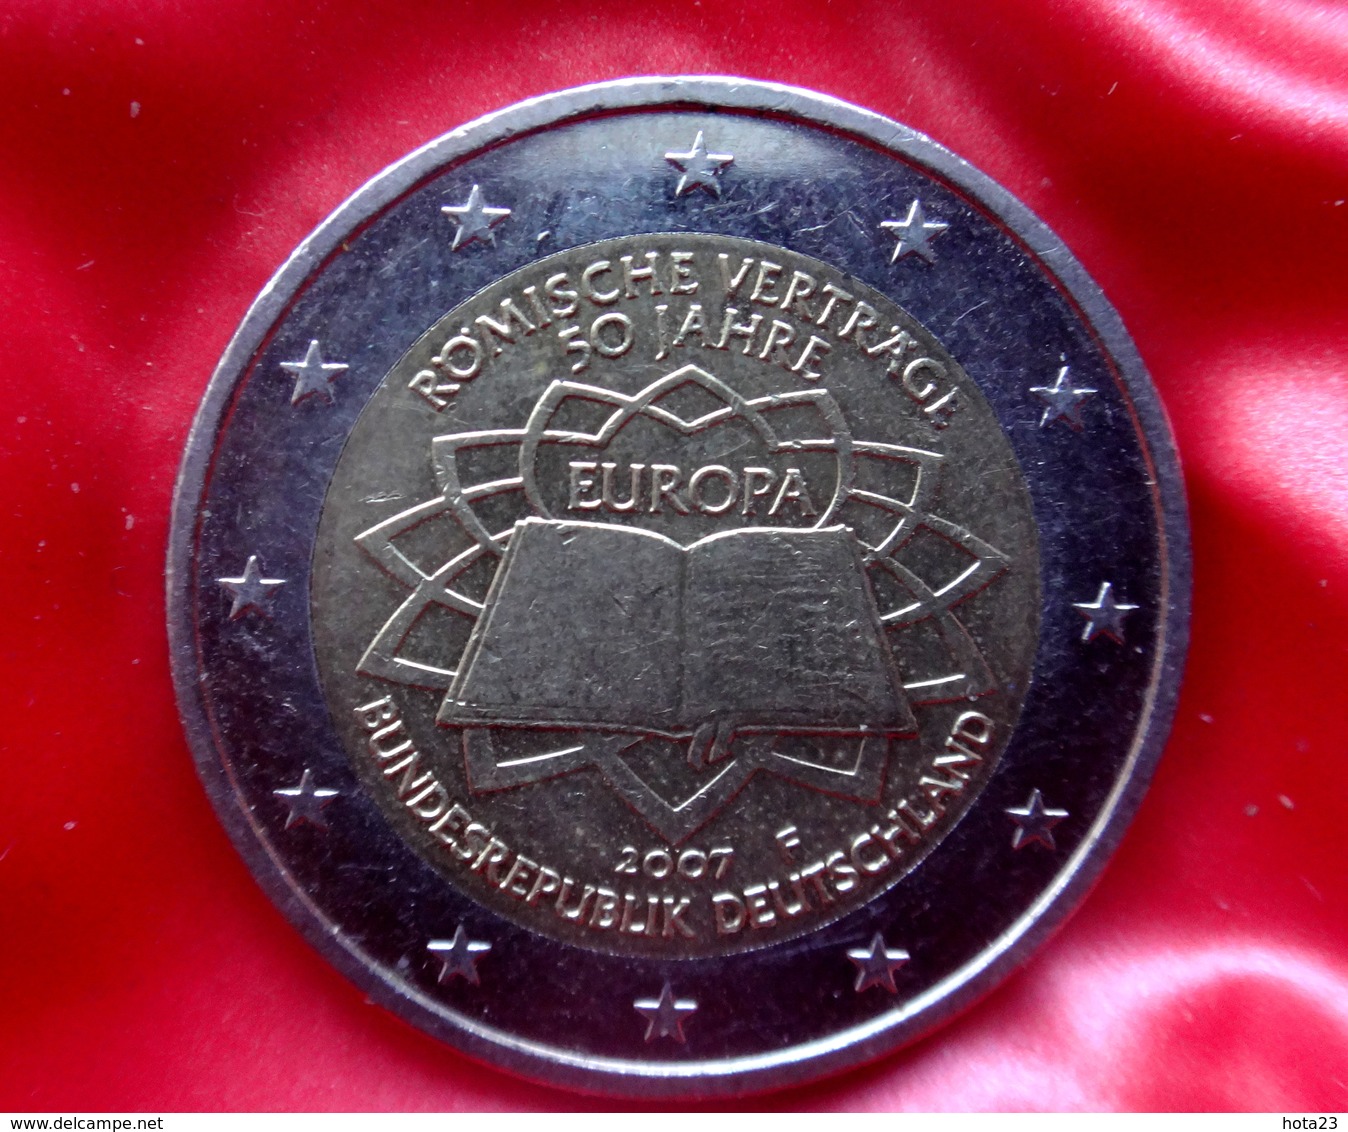 Germany 2 Euro  -  F  -- 2007, Treaty Of Rome  Coin CIRCULATED - Deutschland